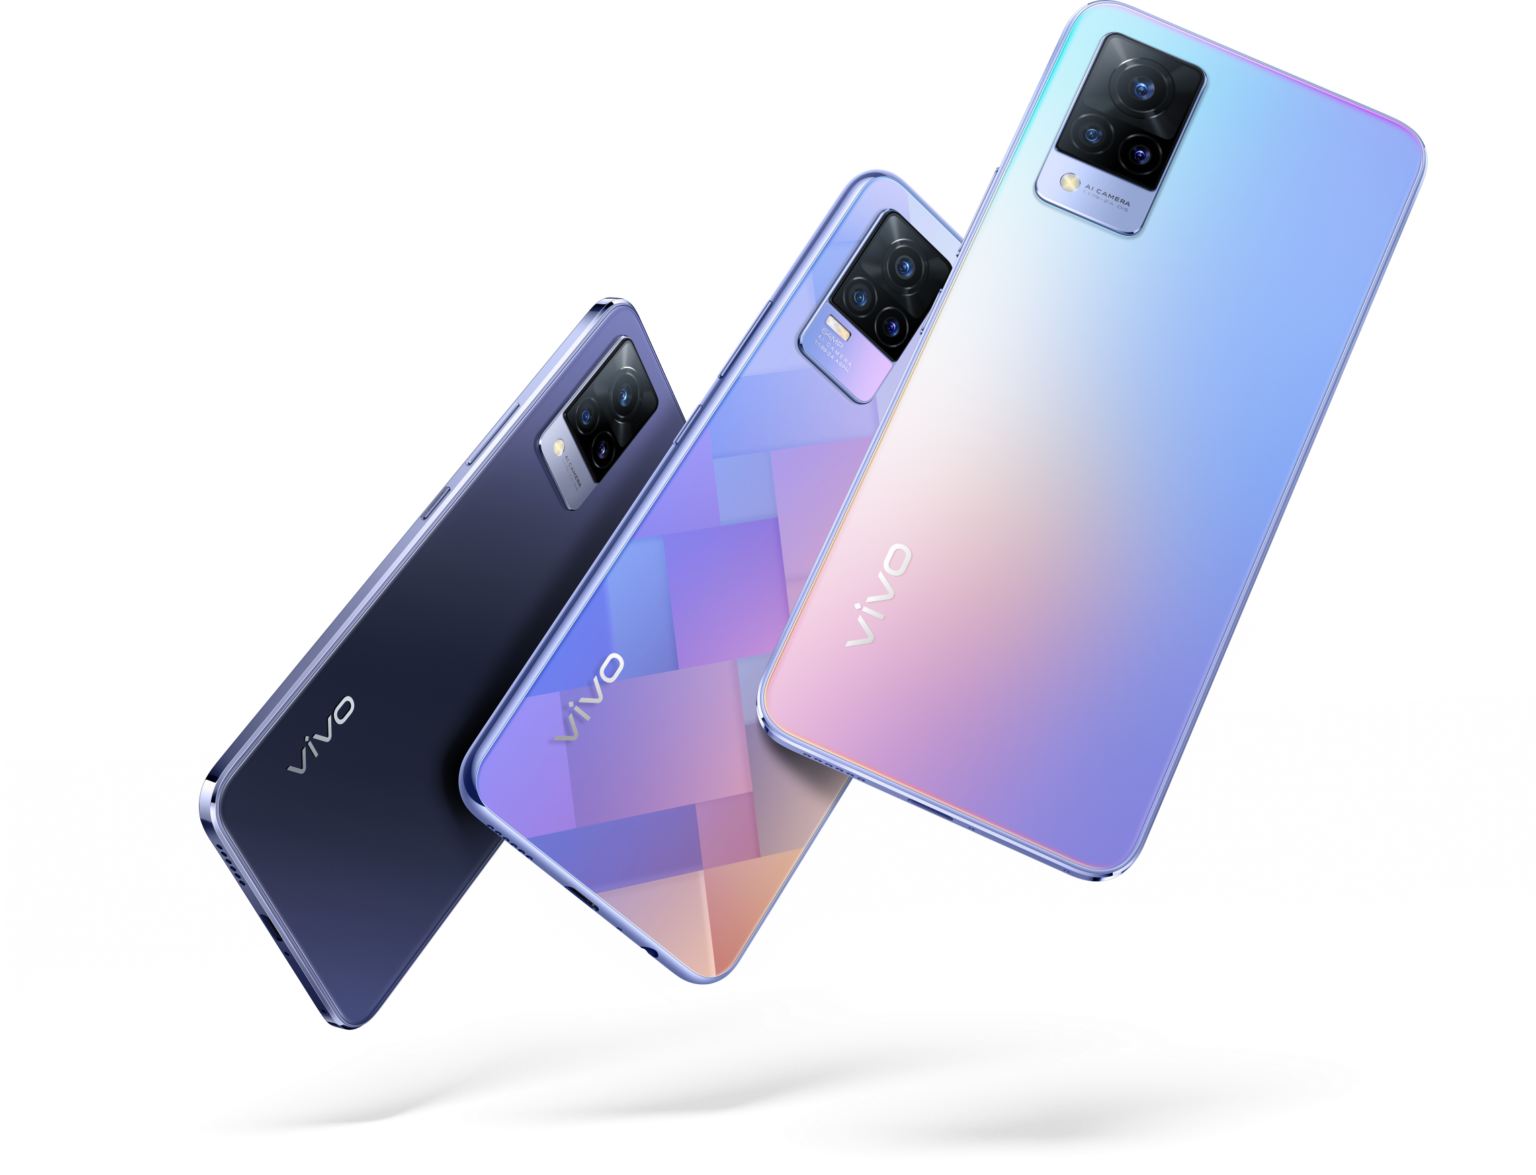 vivo launches the V21 series, brings a new era of selfie phones